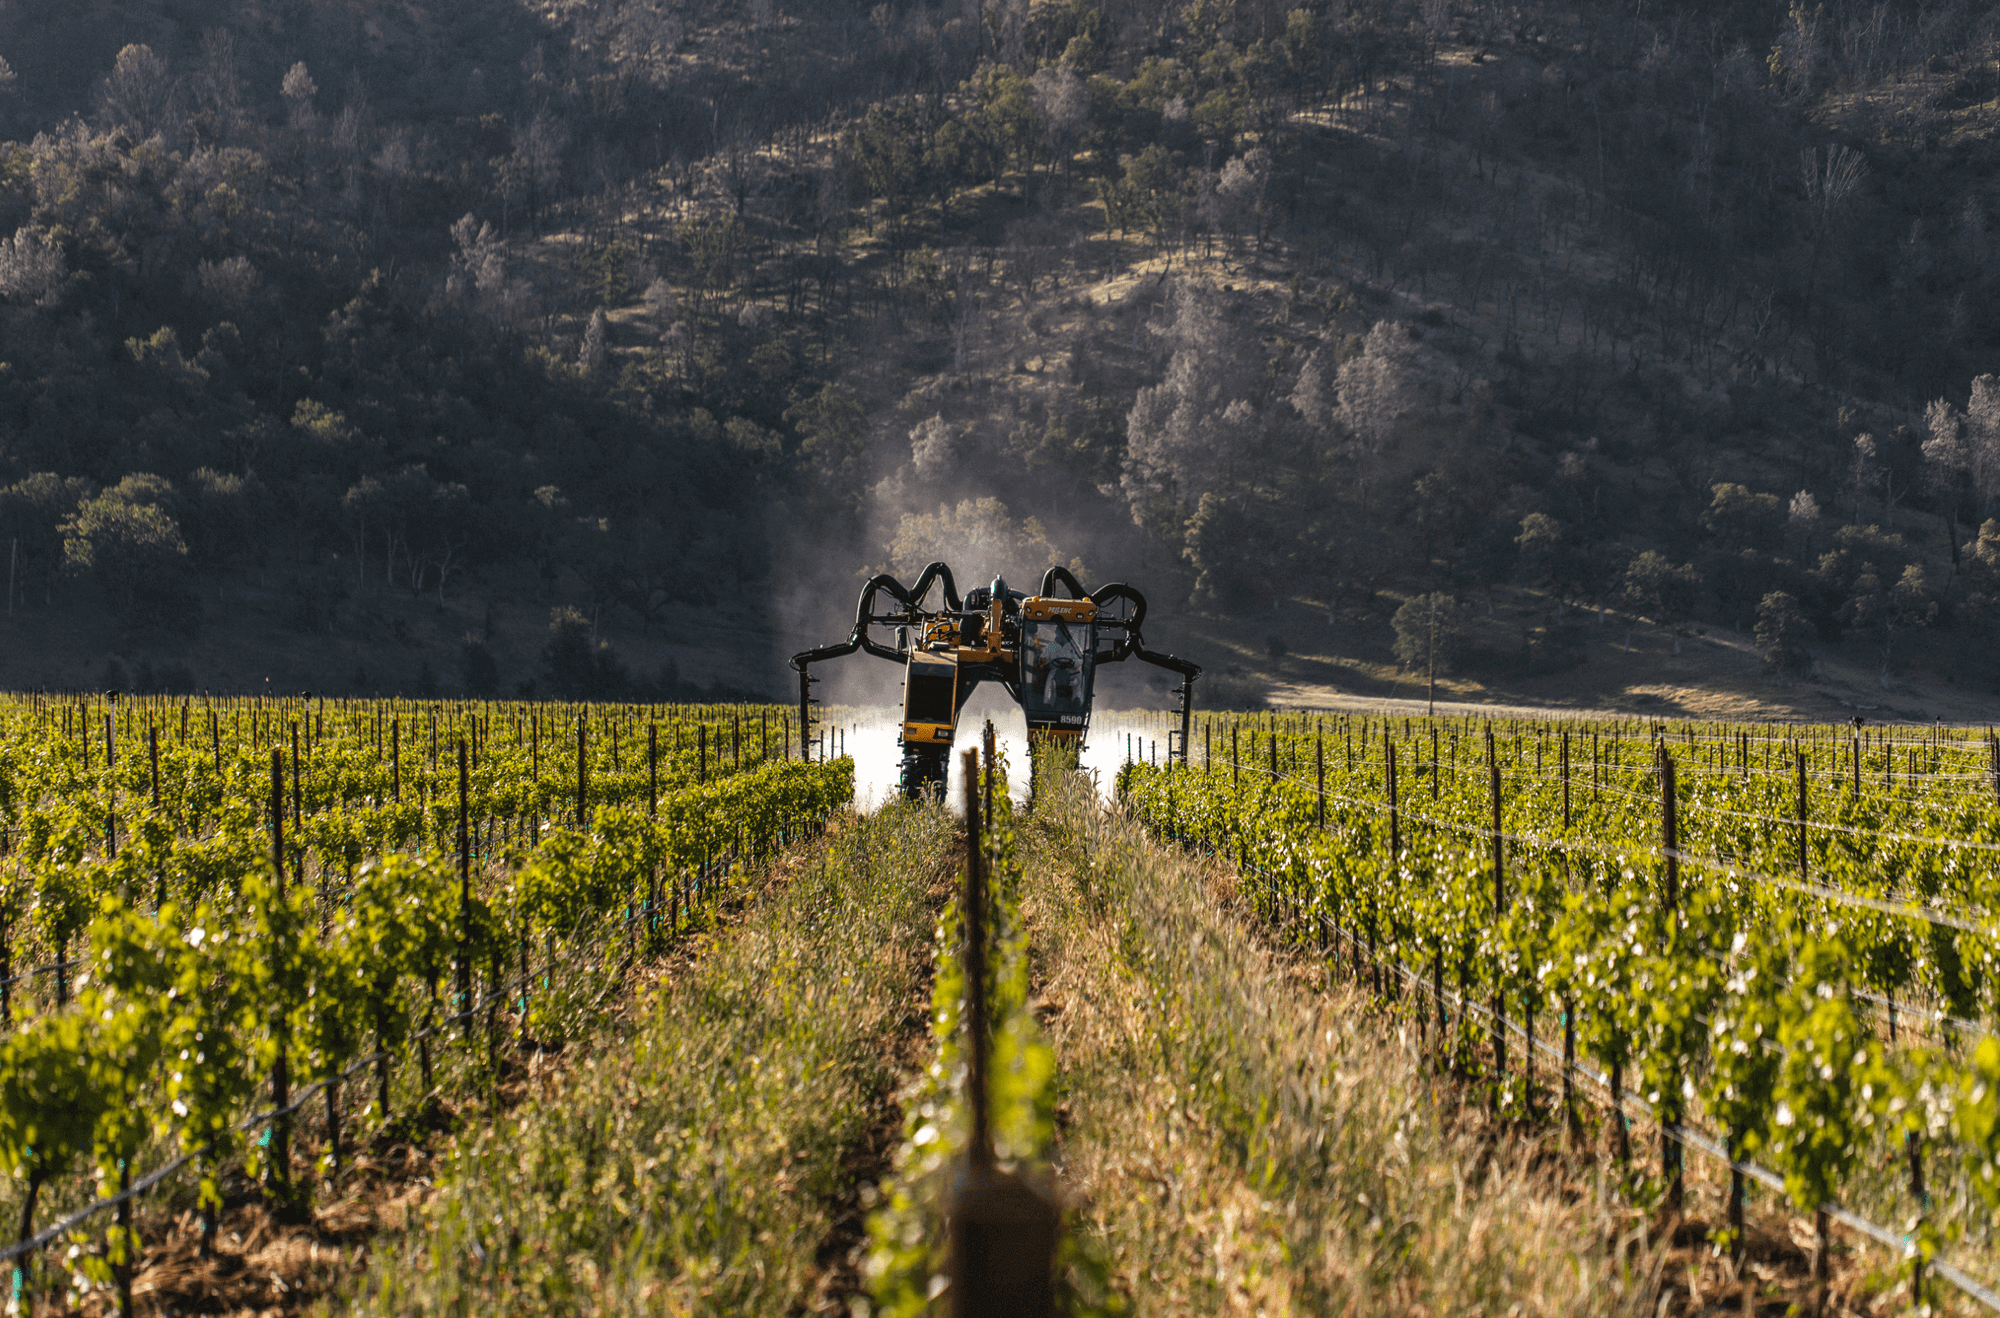 Agriculture and farming in the vineyards